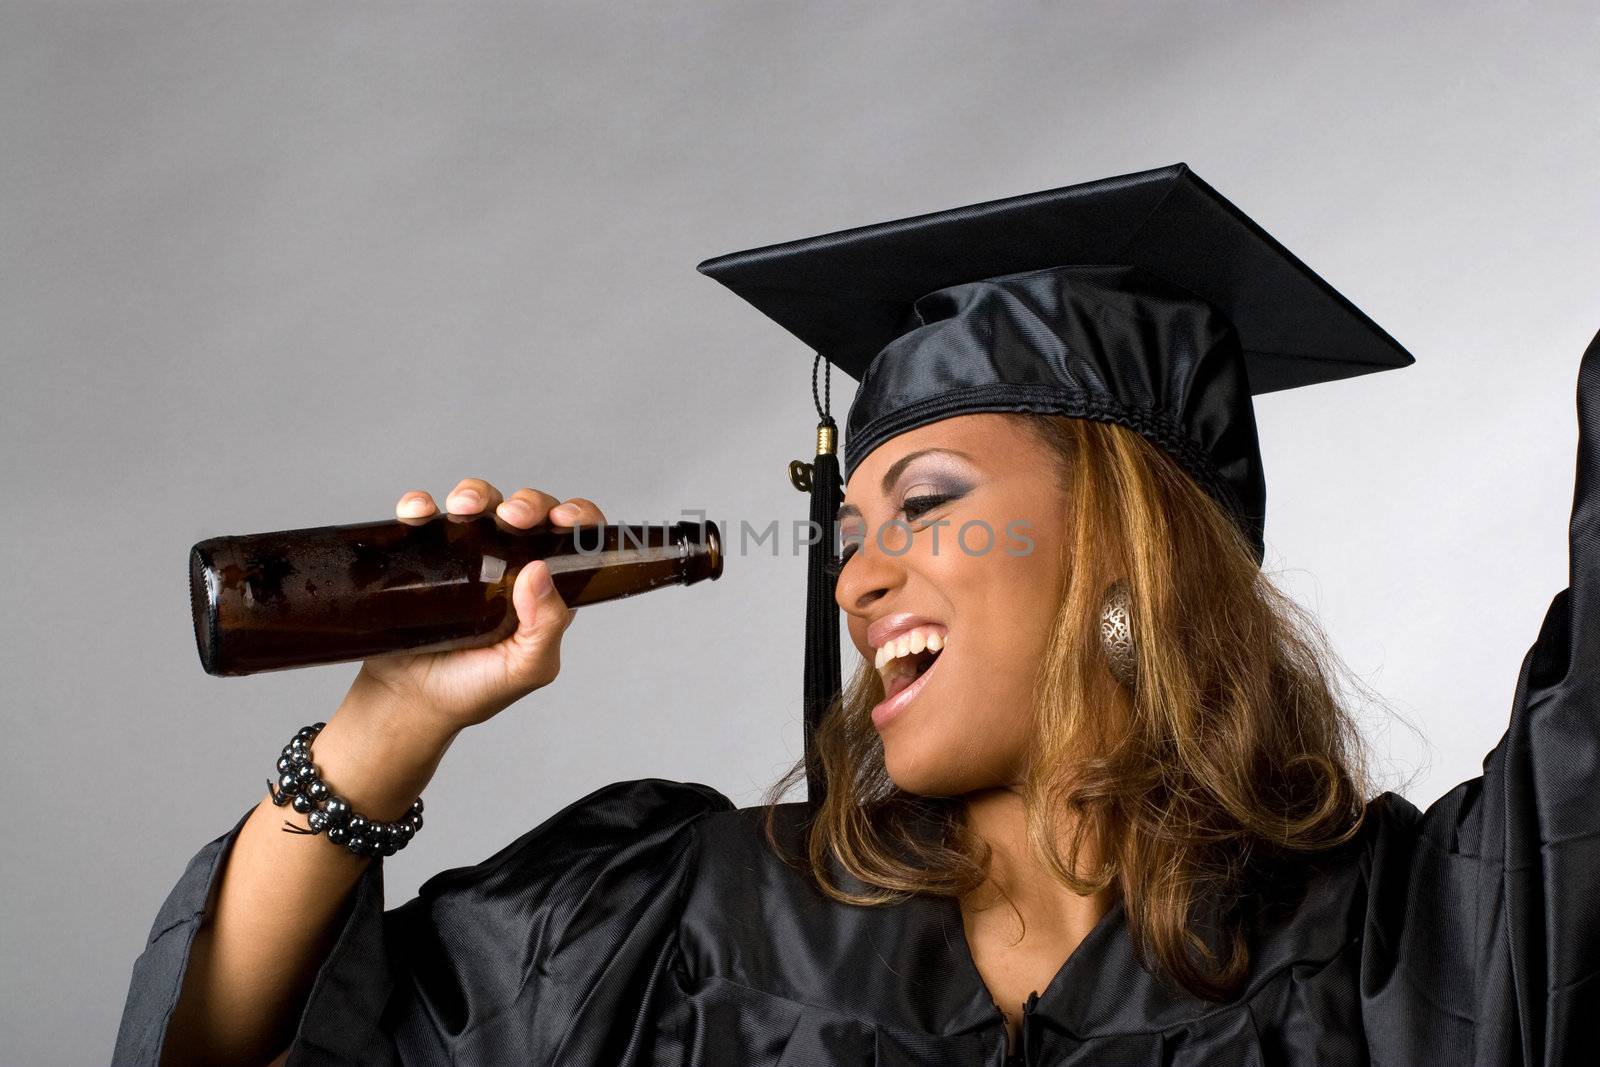 A recent graduate posing in her cap and gown holding beer bottle isolated over a silver background.